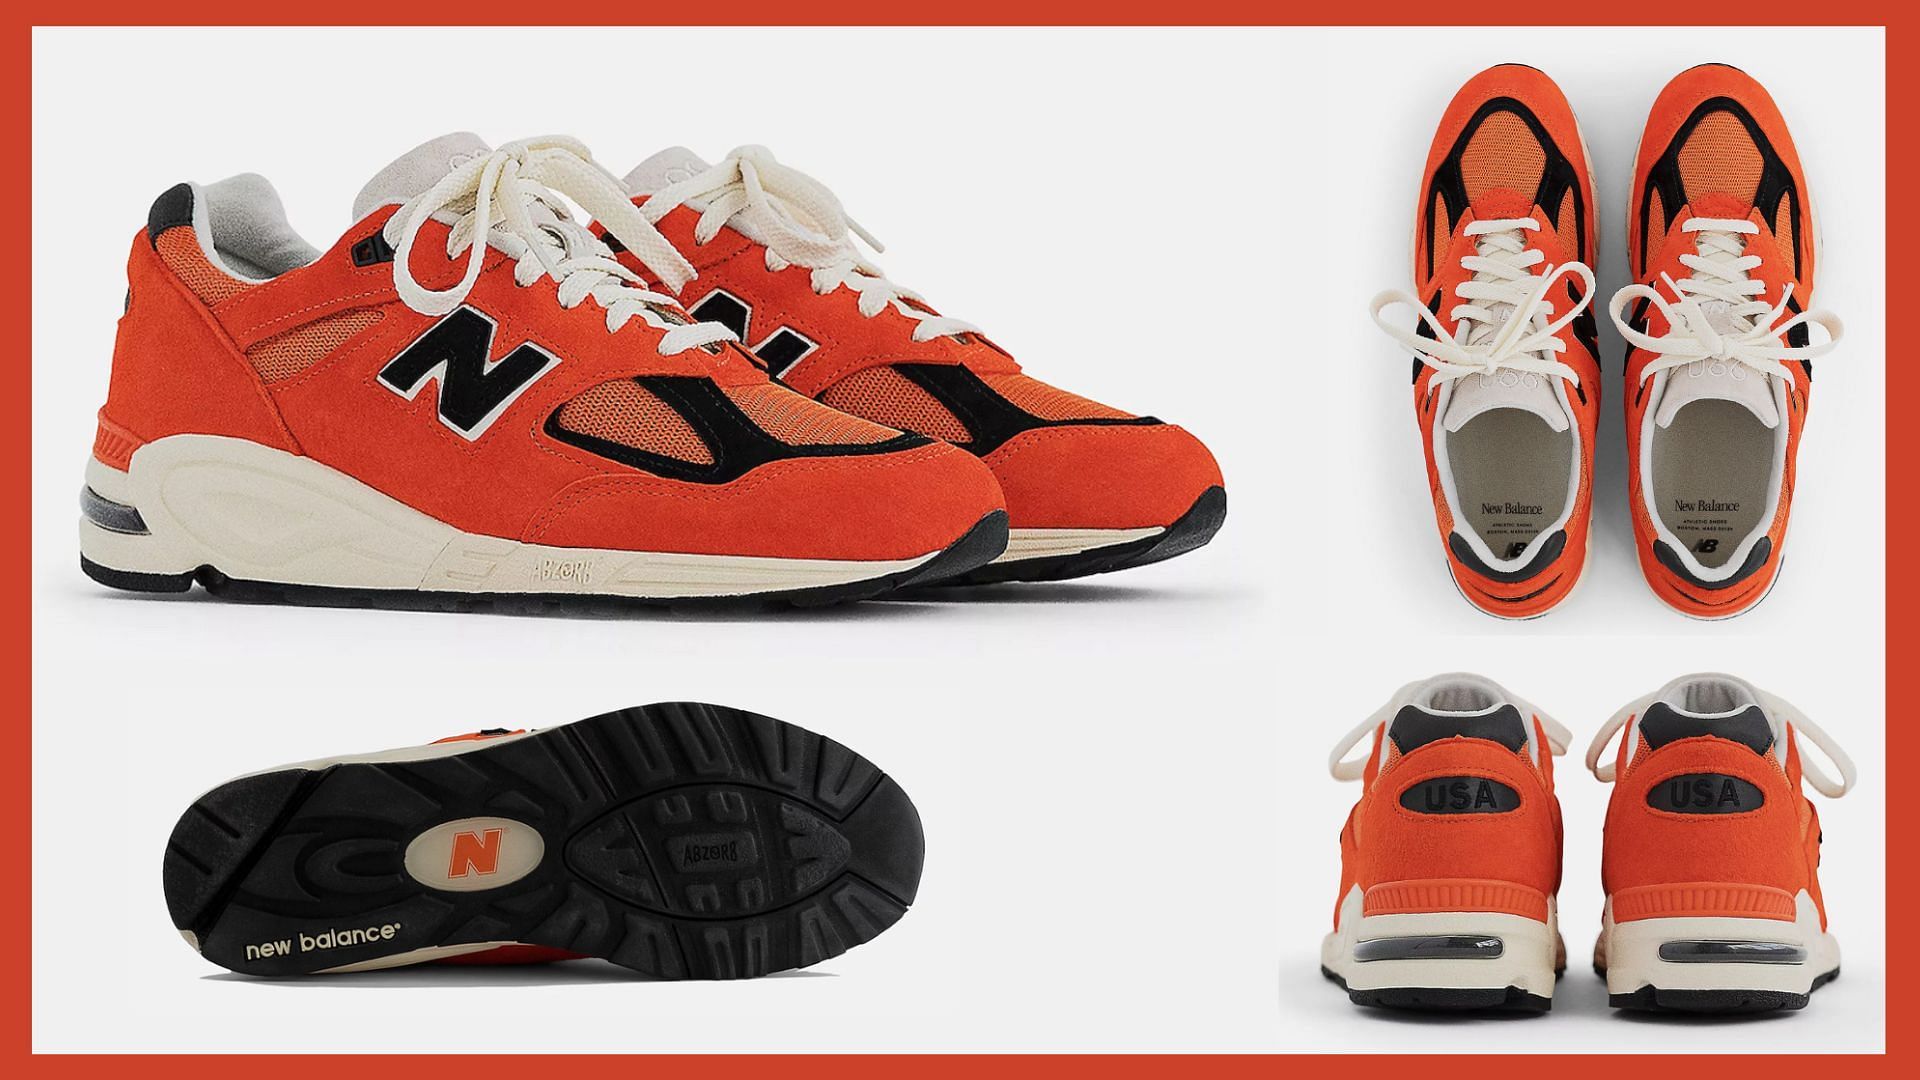 Where to buy New Balance 990v2 Made in USA Marigold colorway? Price ...